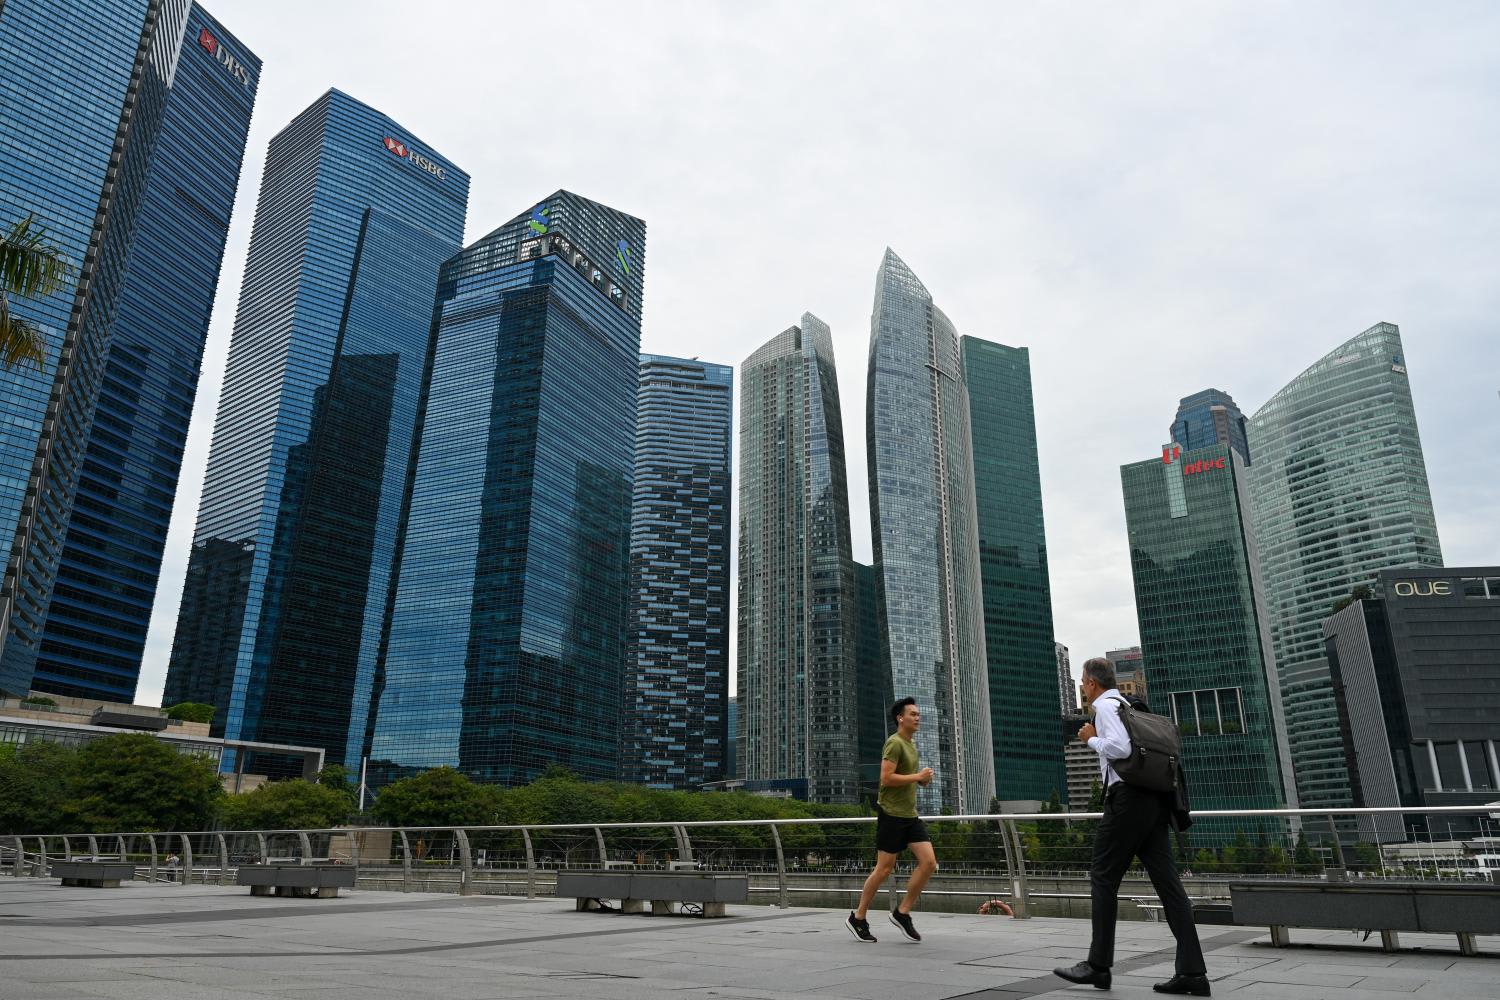 The author believes that with the low rankings in retaining talents in the recent Global Talent Competitiveness Index, Singapore must consider ways to retain rainmakers and star players. 